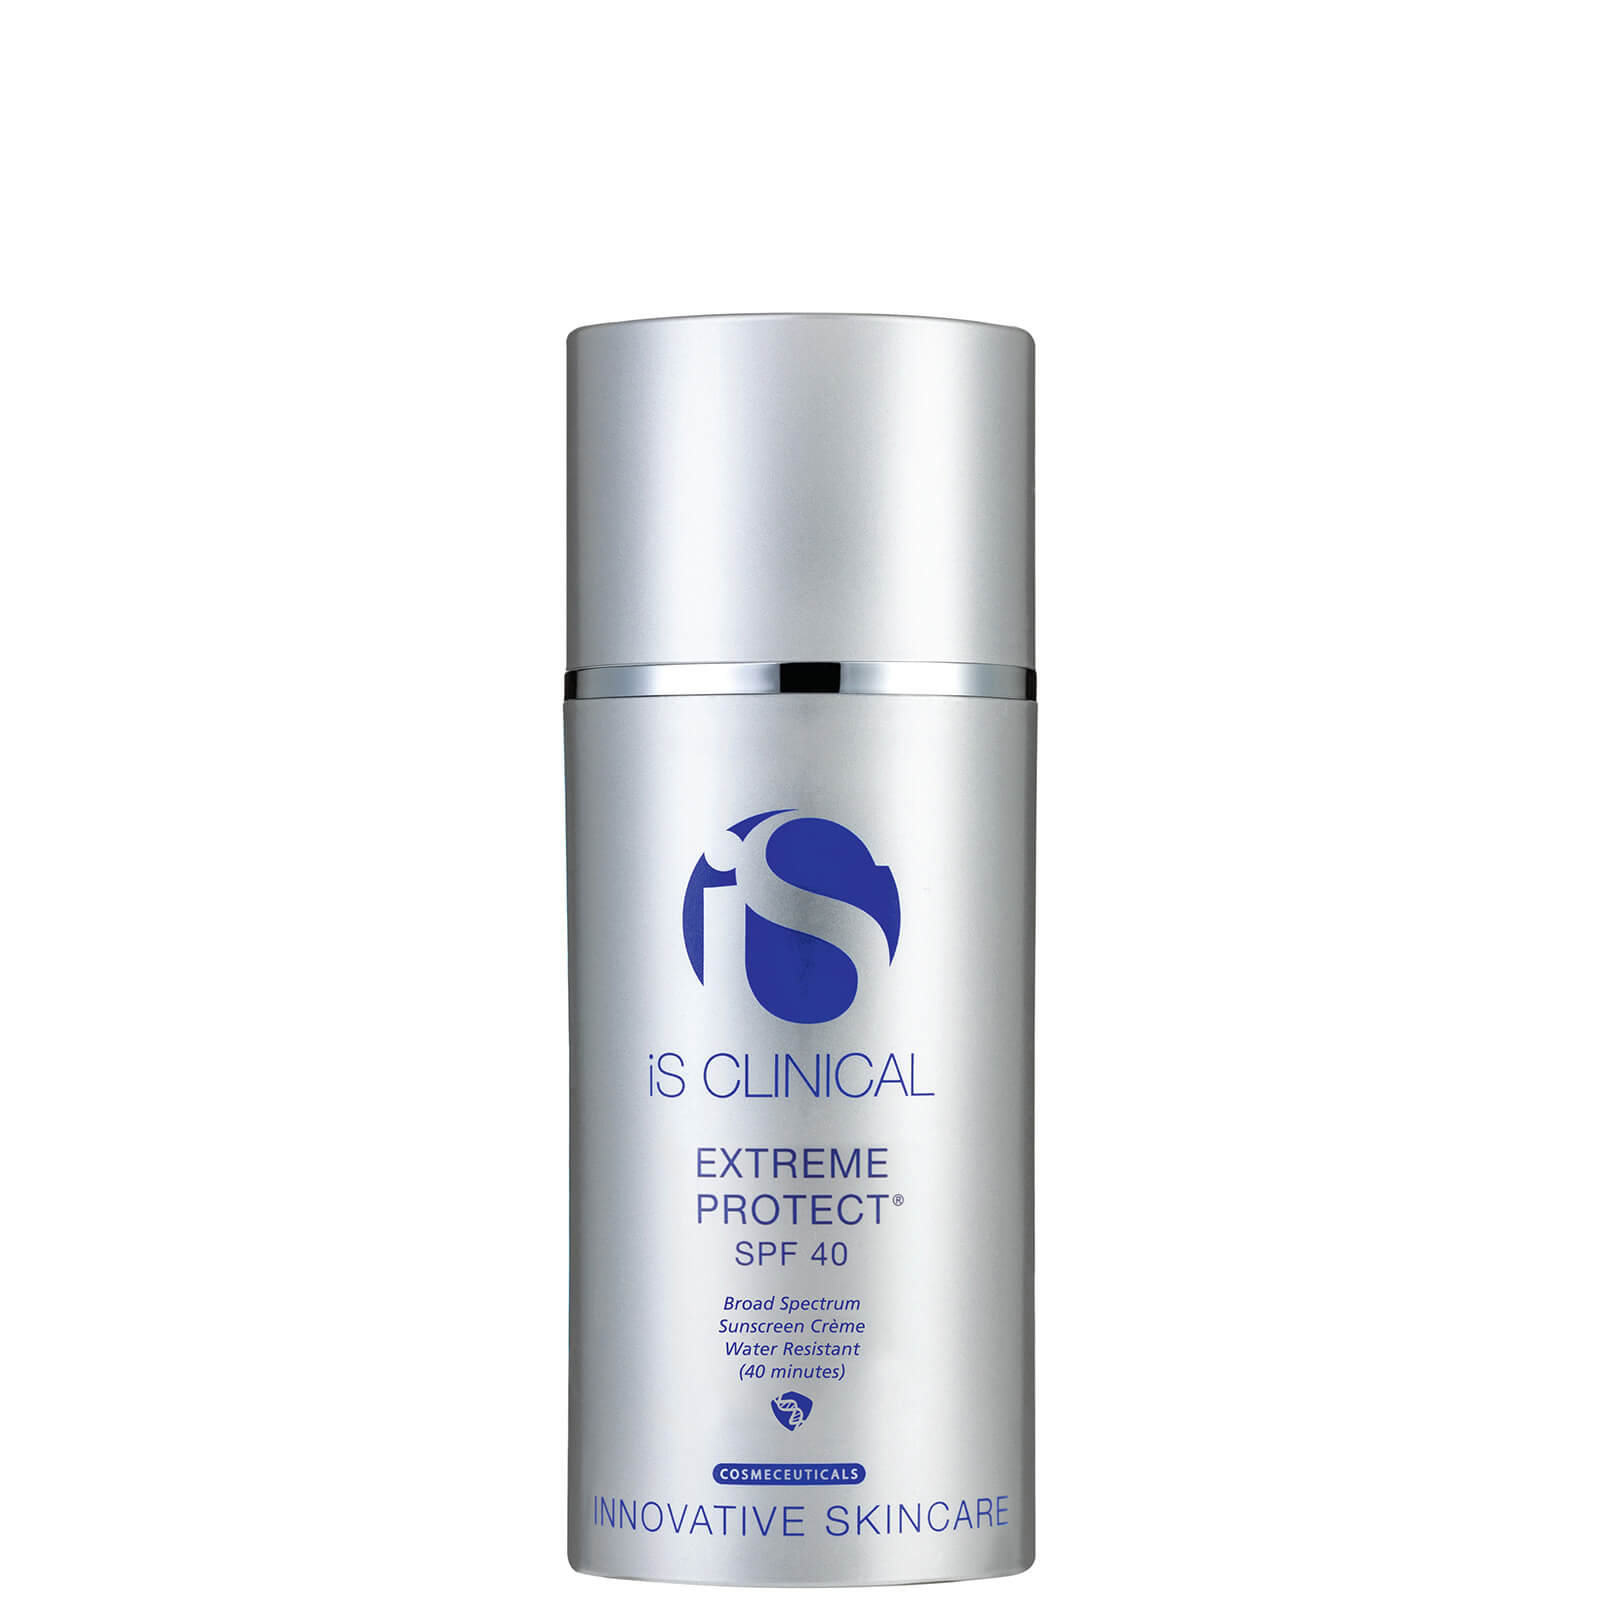 IS CLINICAL EXTREME PROTECT SPF 40,13521